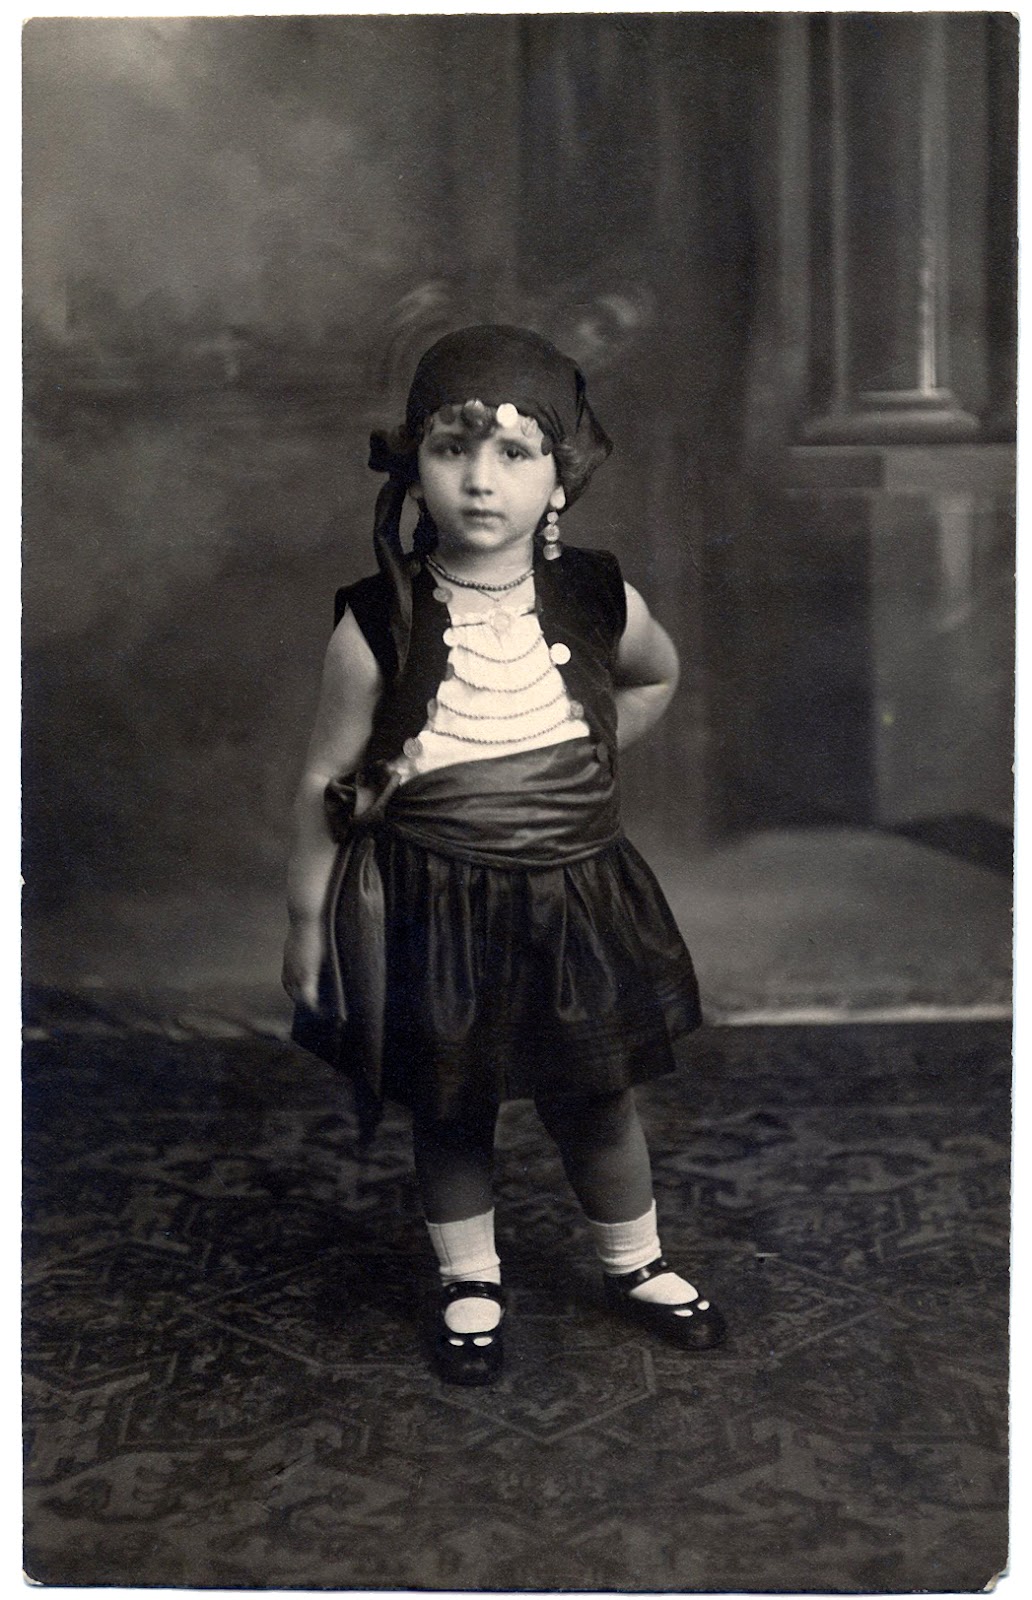 Old Photo - Adorable Little Gypsy Girl - The Graphics Fairy